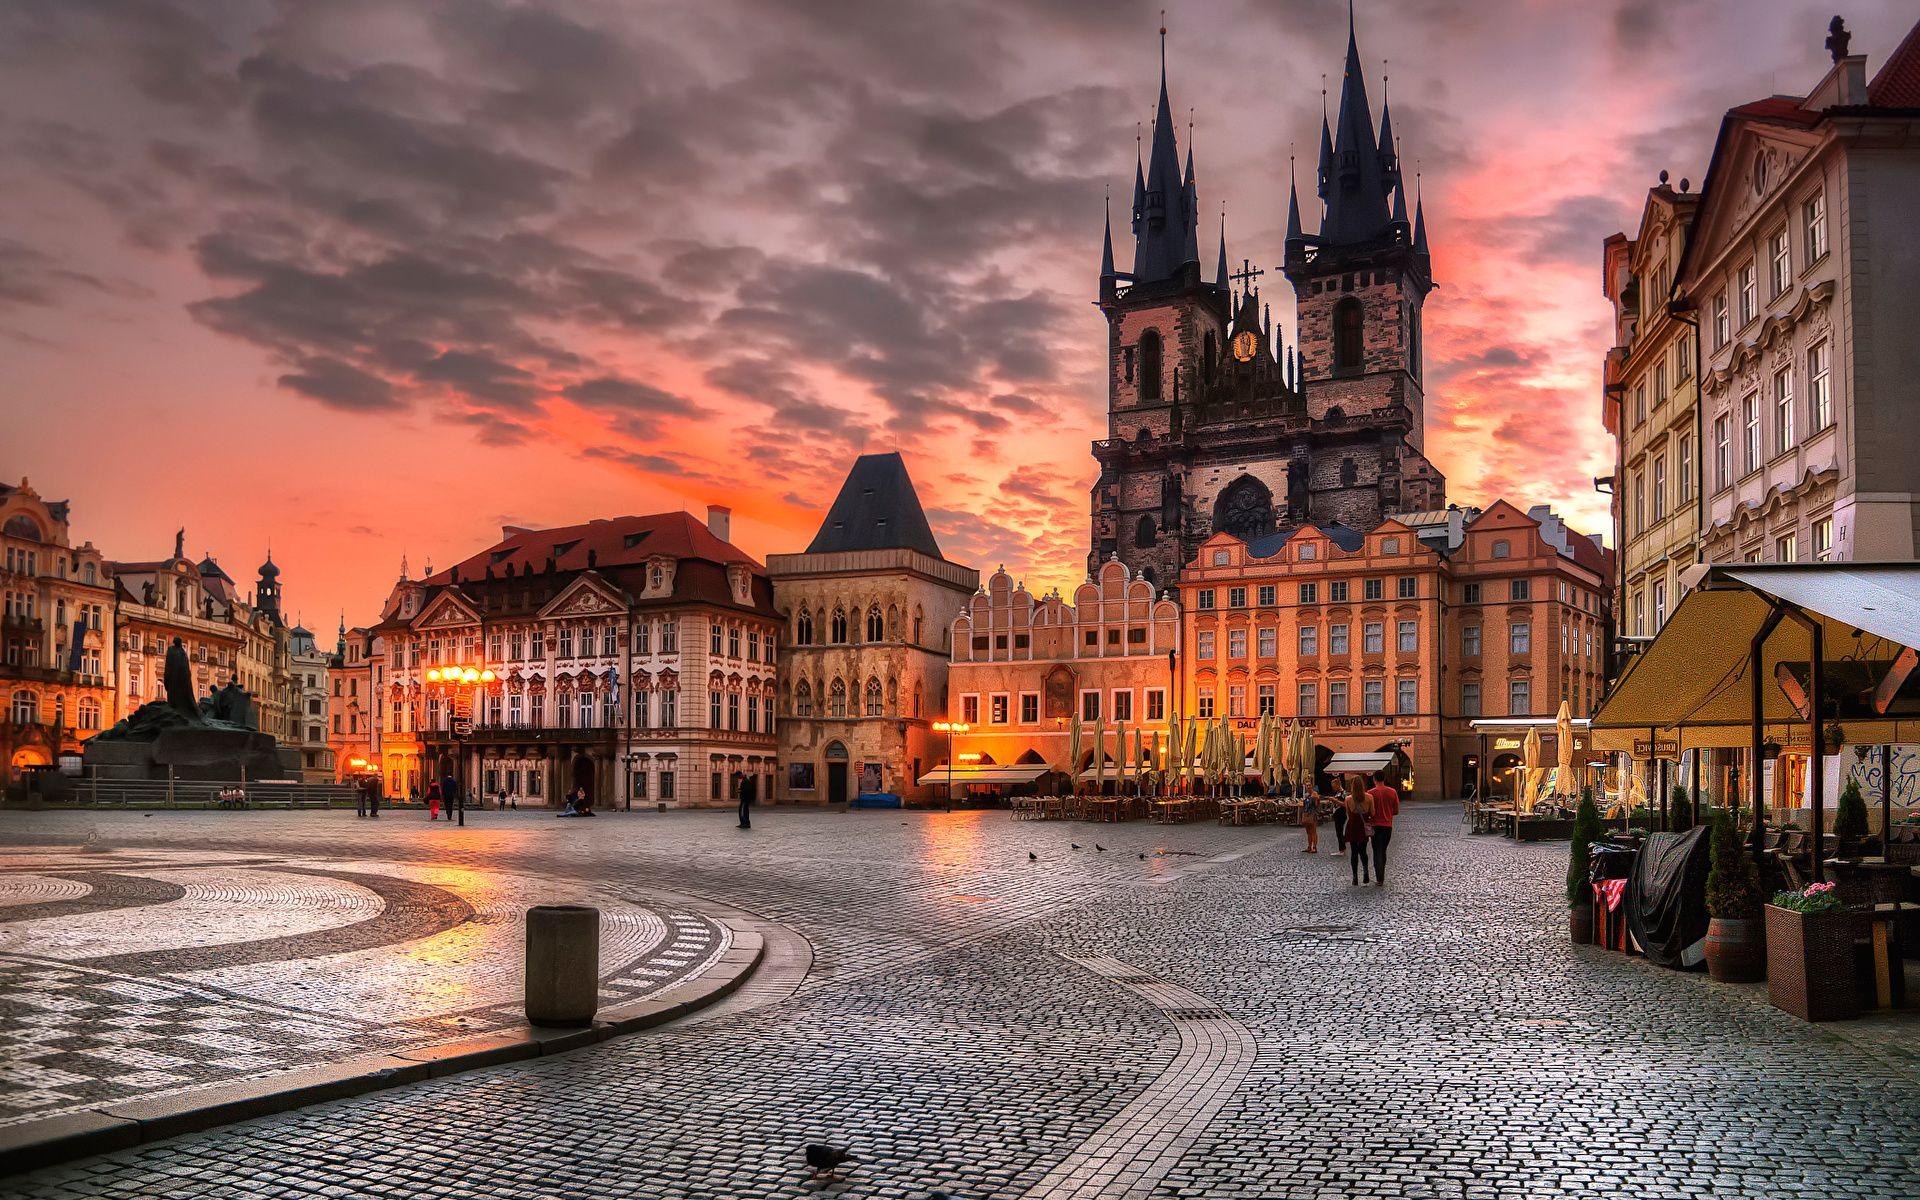 File:Prague old town square panorama.jpg - Wikimedia Commons